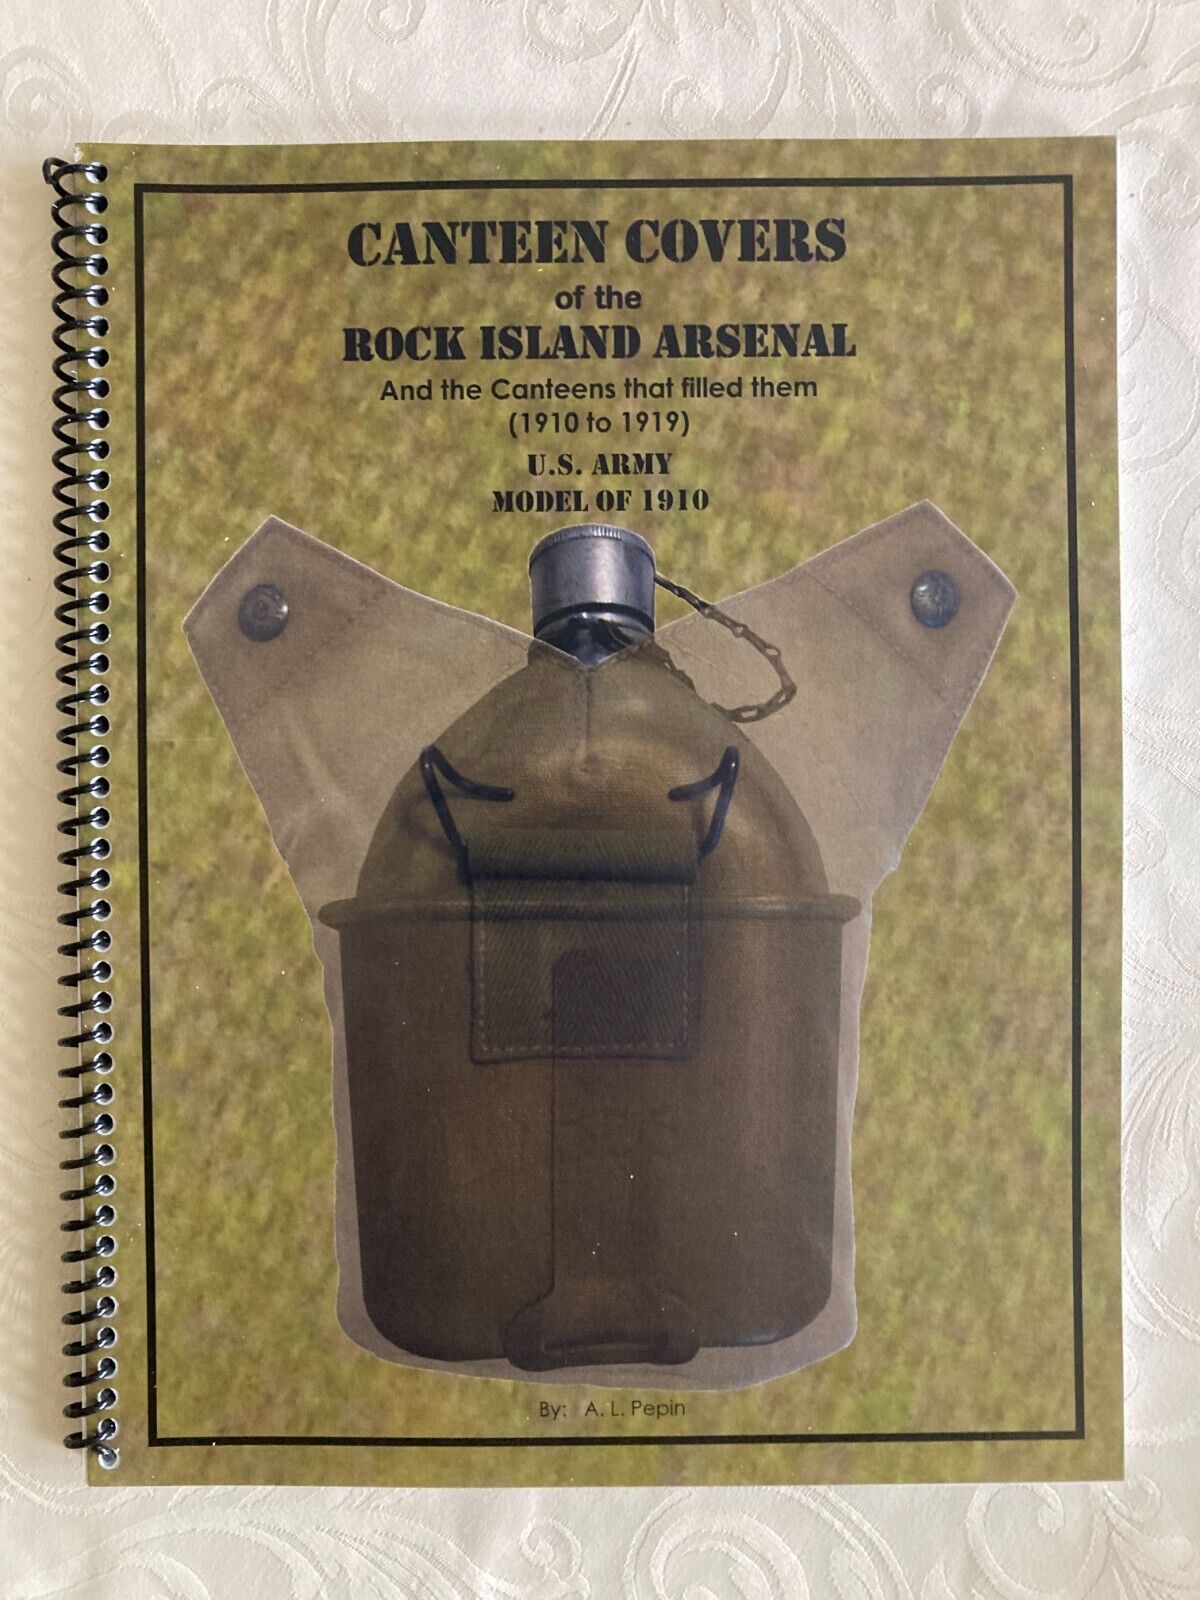 Book-Canteen Covers of the Rock Island Arsenal and the Canteens that filled them